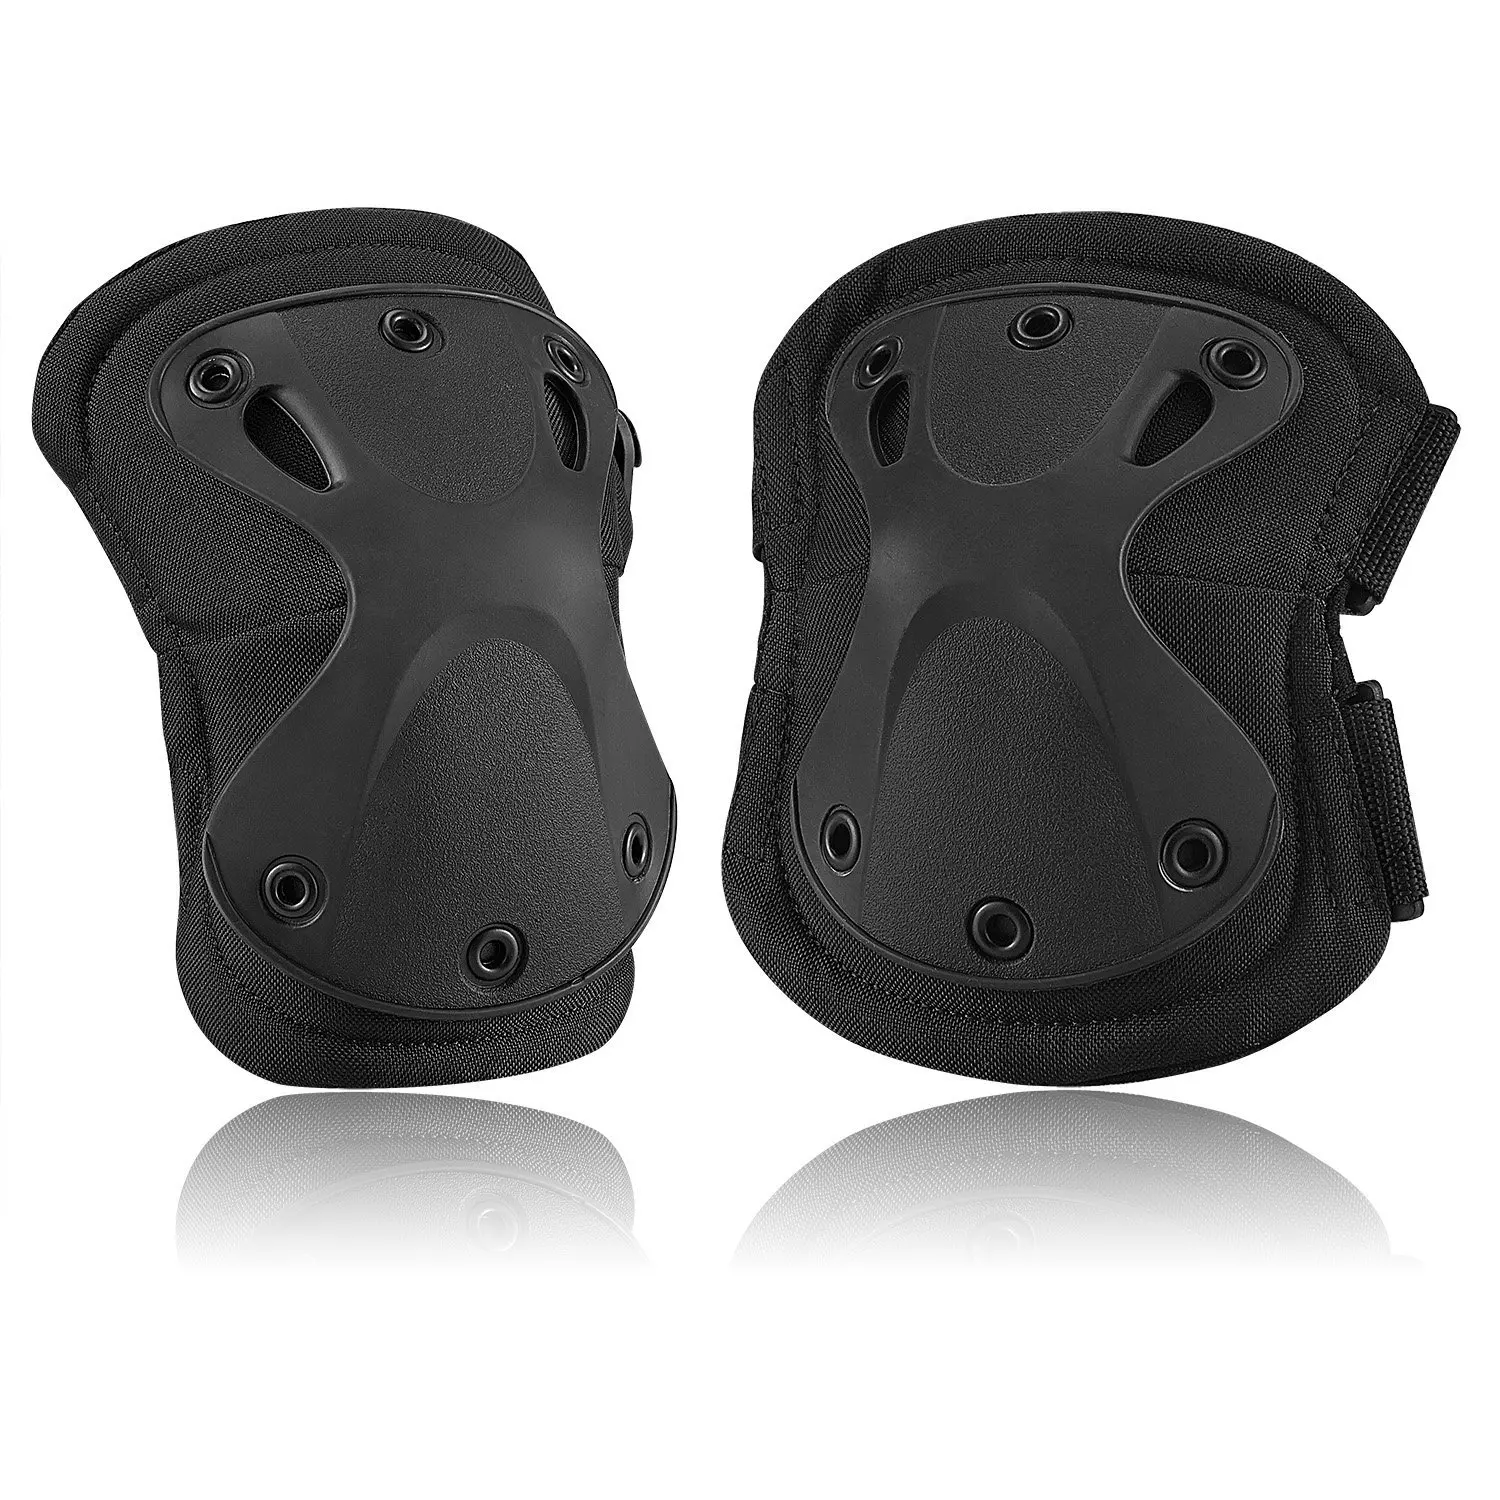 Military Army Tactical Combat Knee & Elbow Protective Pads - Buy ...